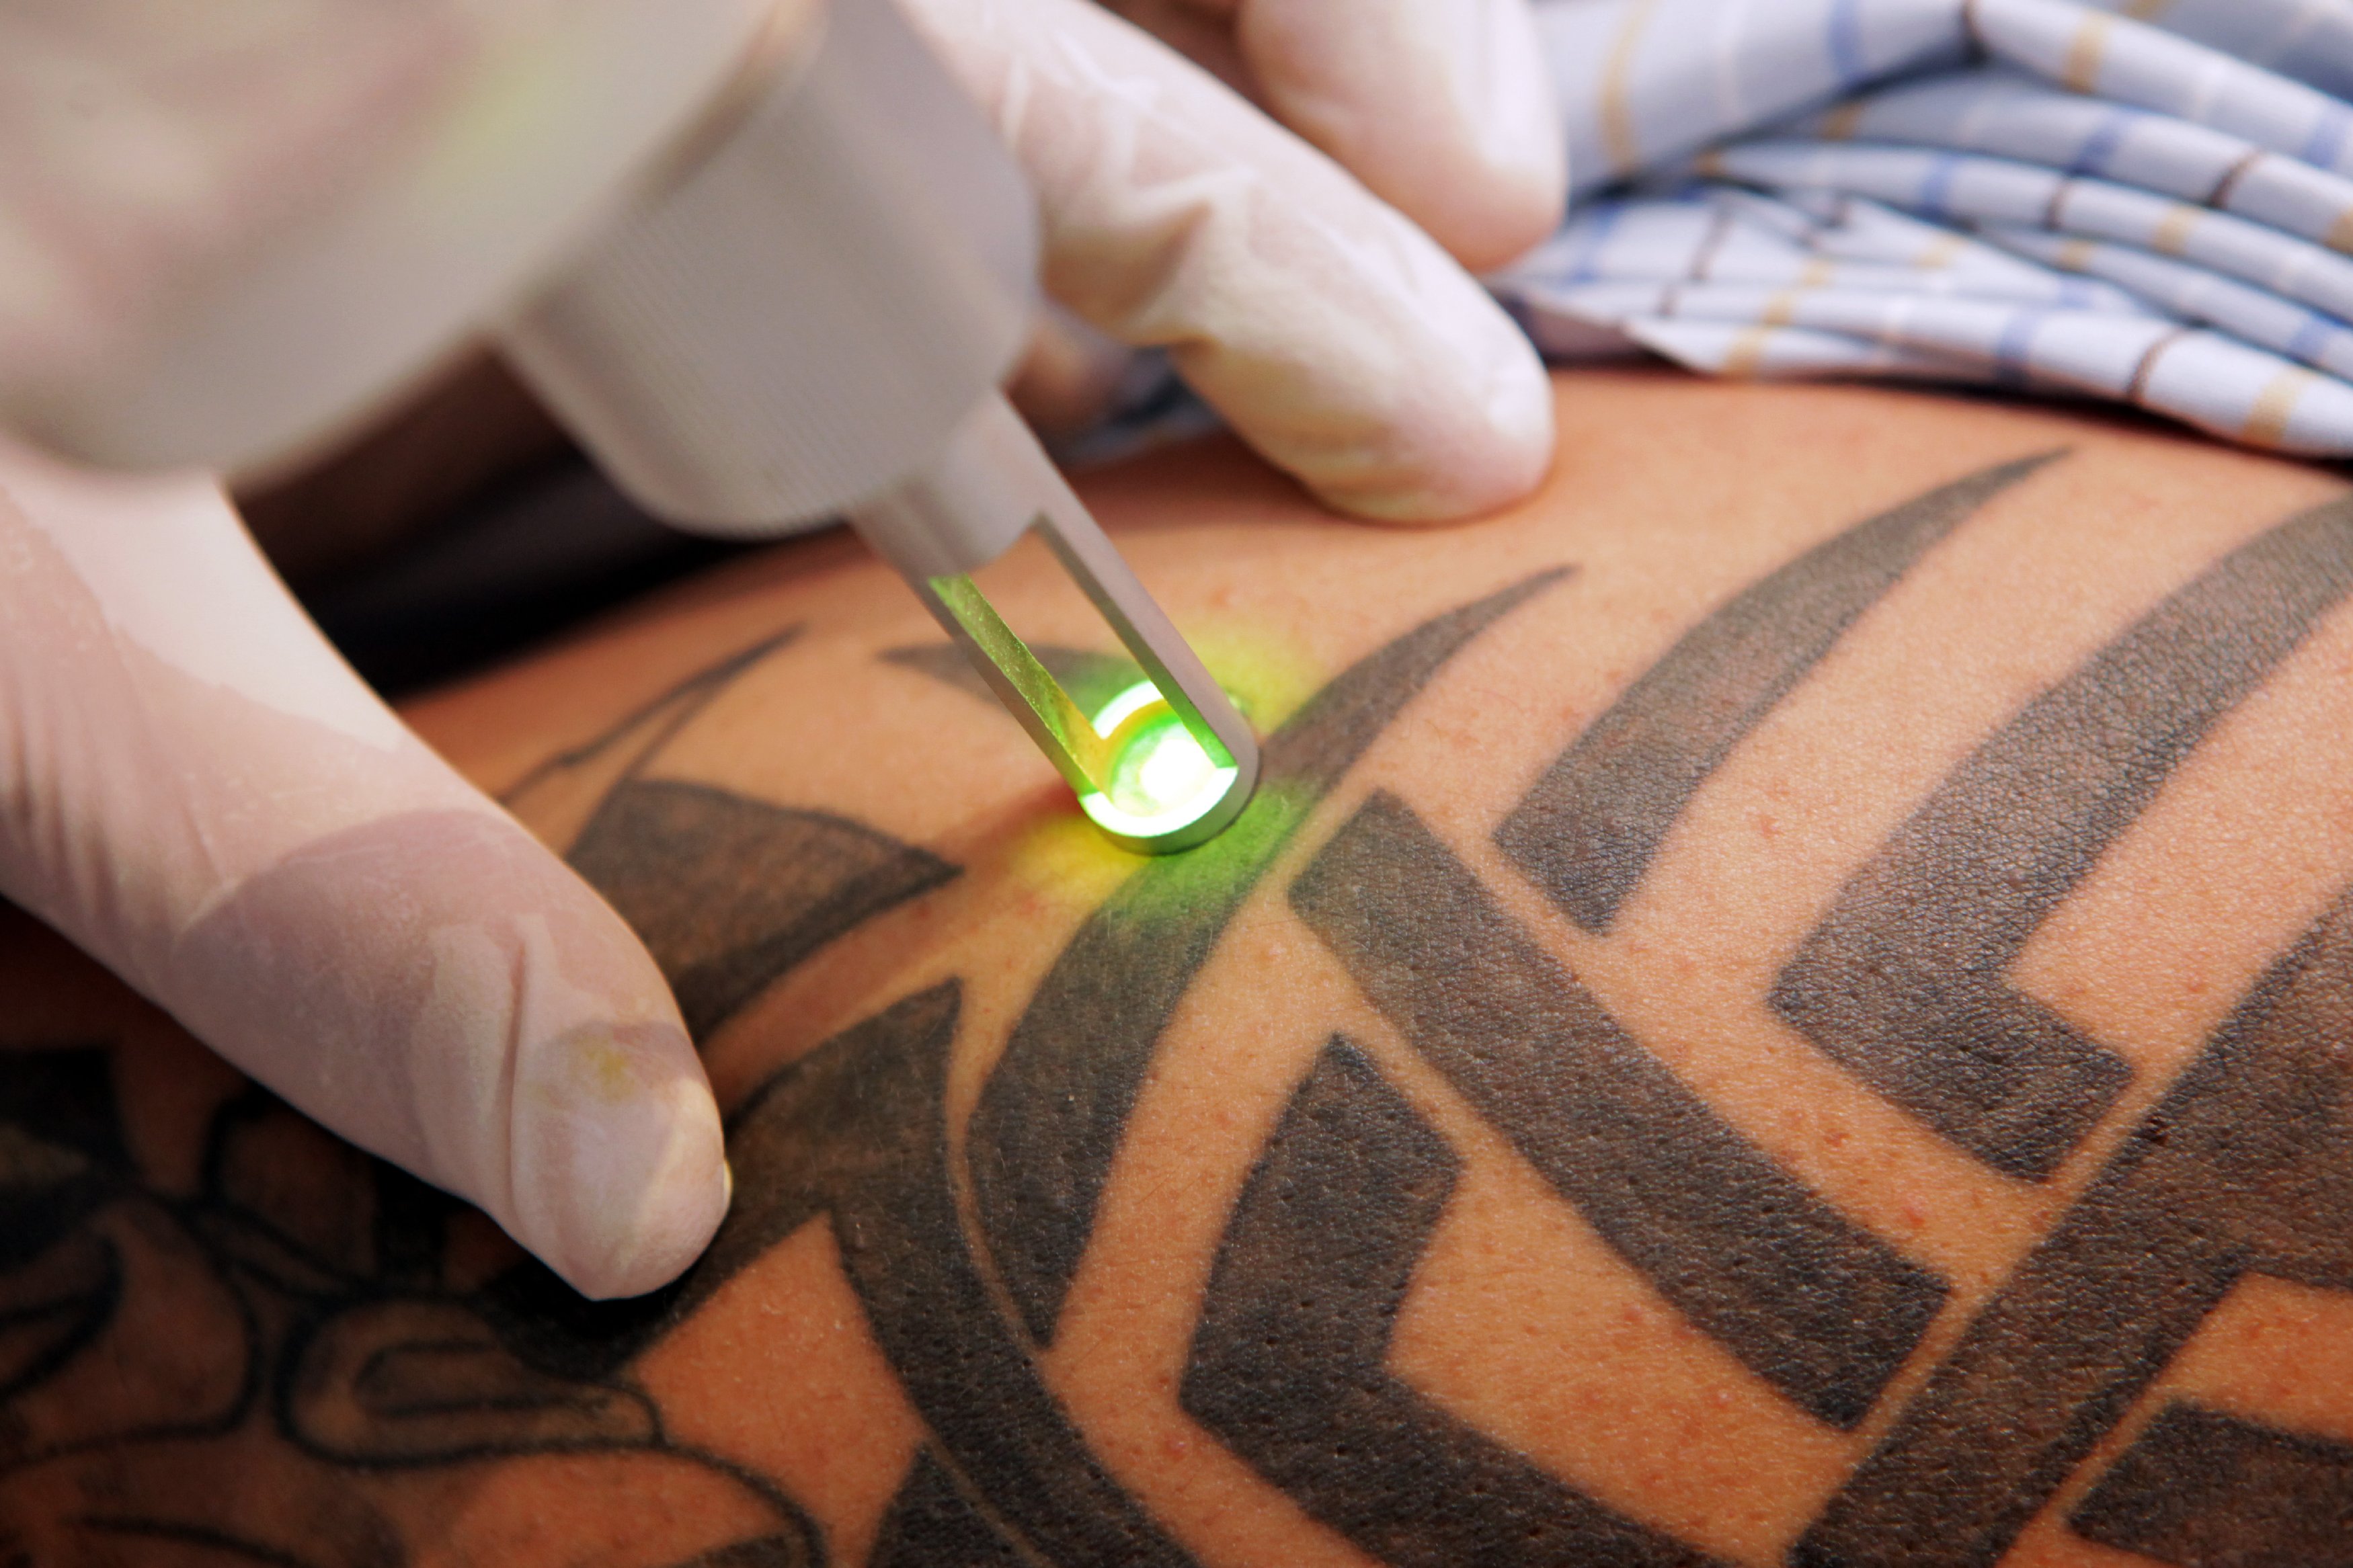 Are Scars and Blisters Possible During Laser Tattoo Removal